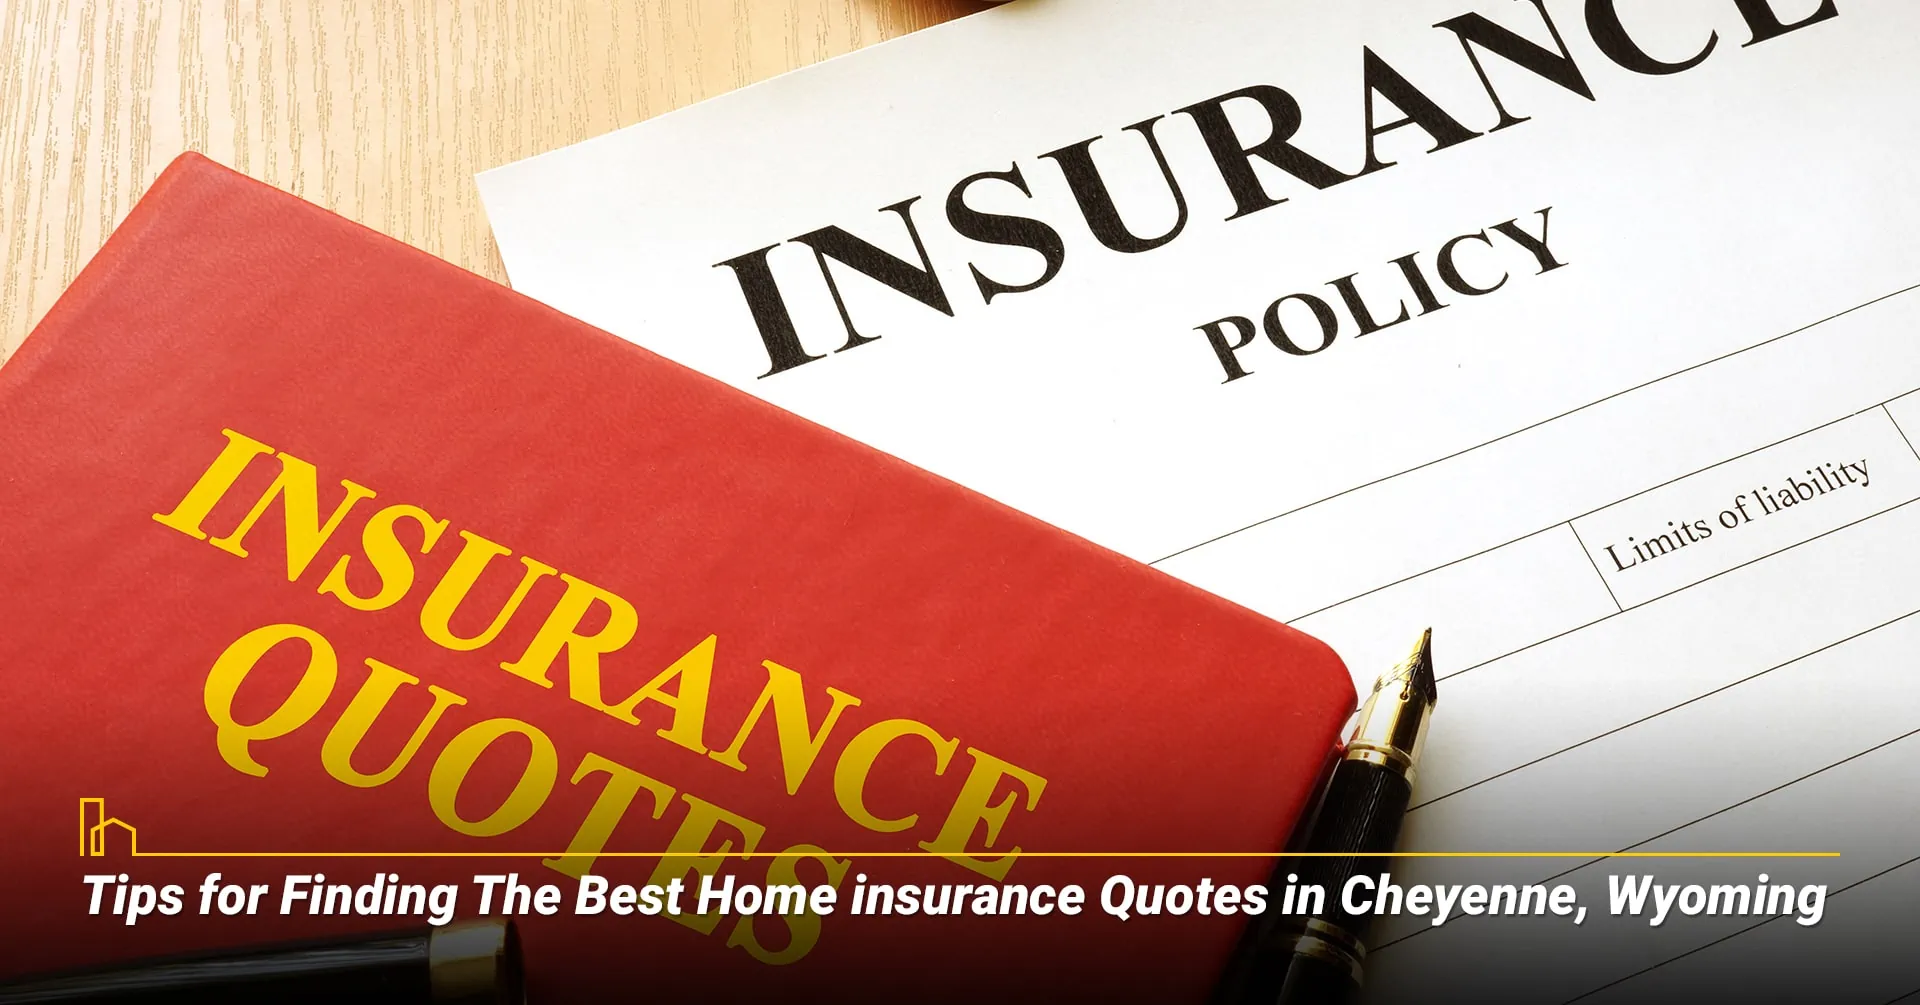 TIPS FOR FINDING THE BEST HOME INSURANCE QUOTES IN CHEYENNE, WYOMING